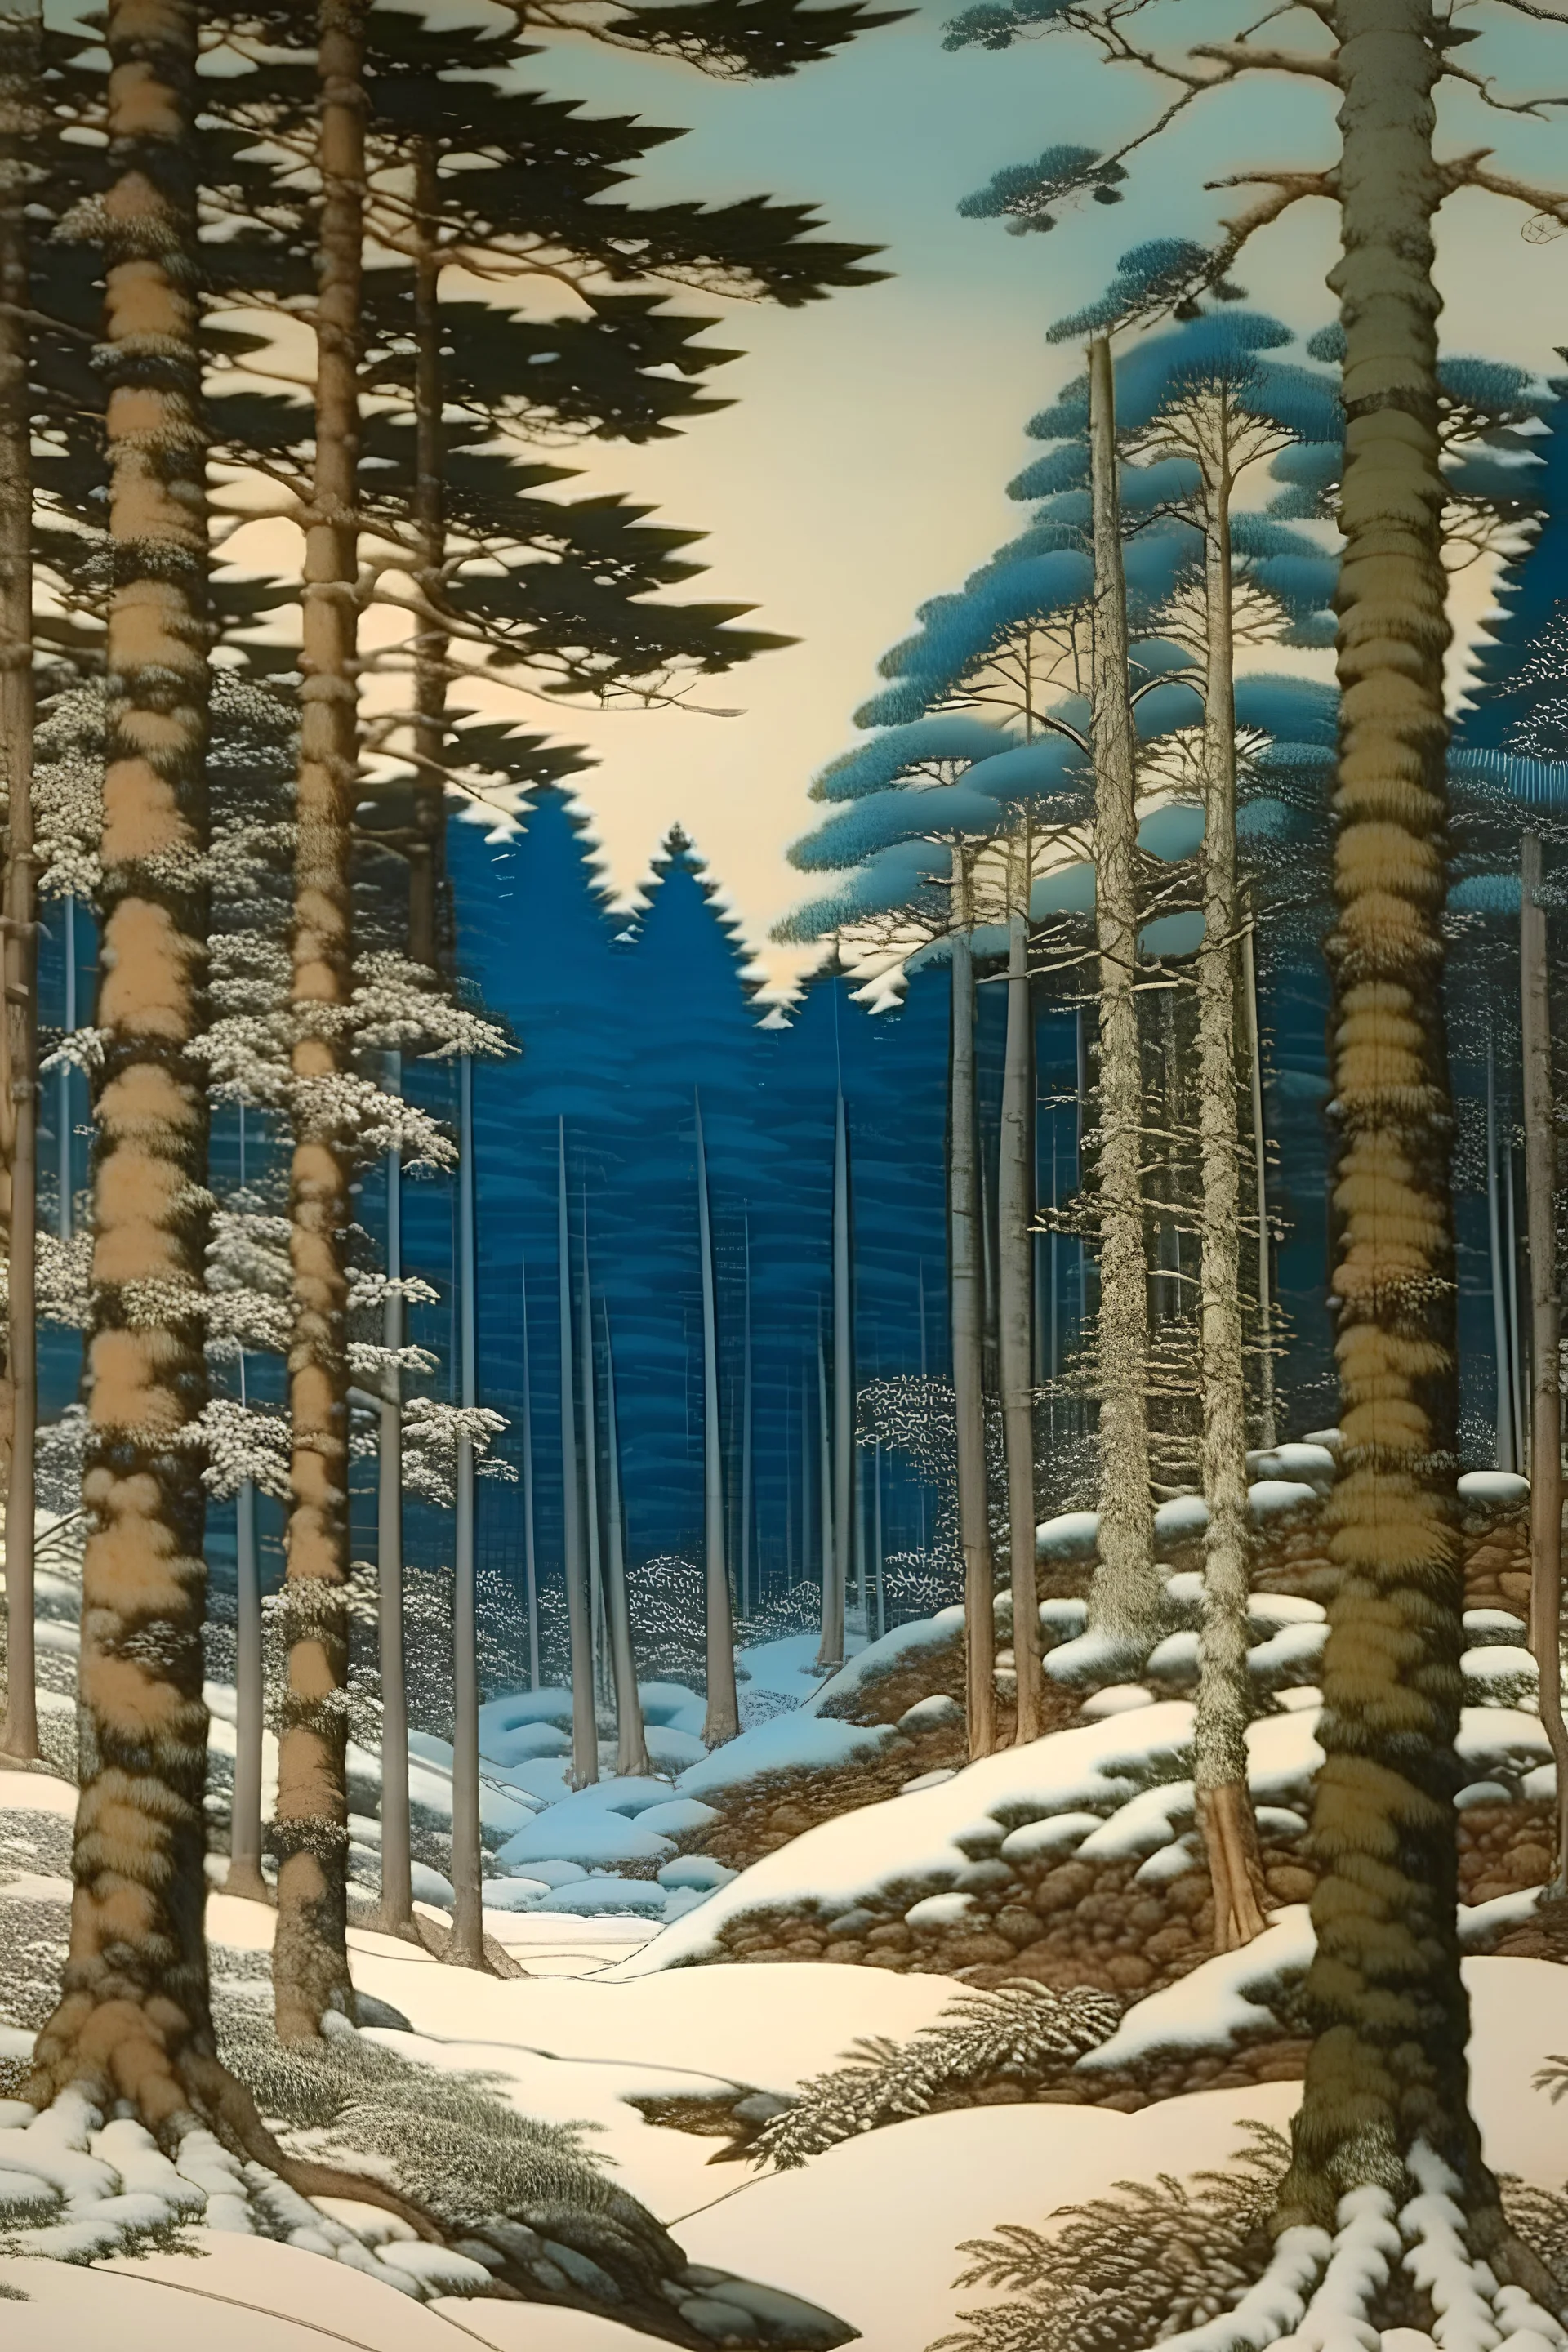 A winter forest covered in snow painted by Katsushika Hokusai